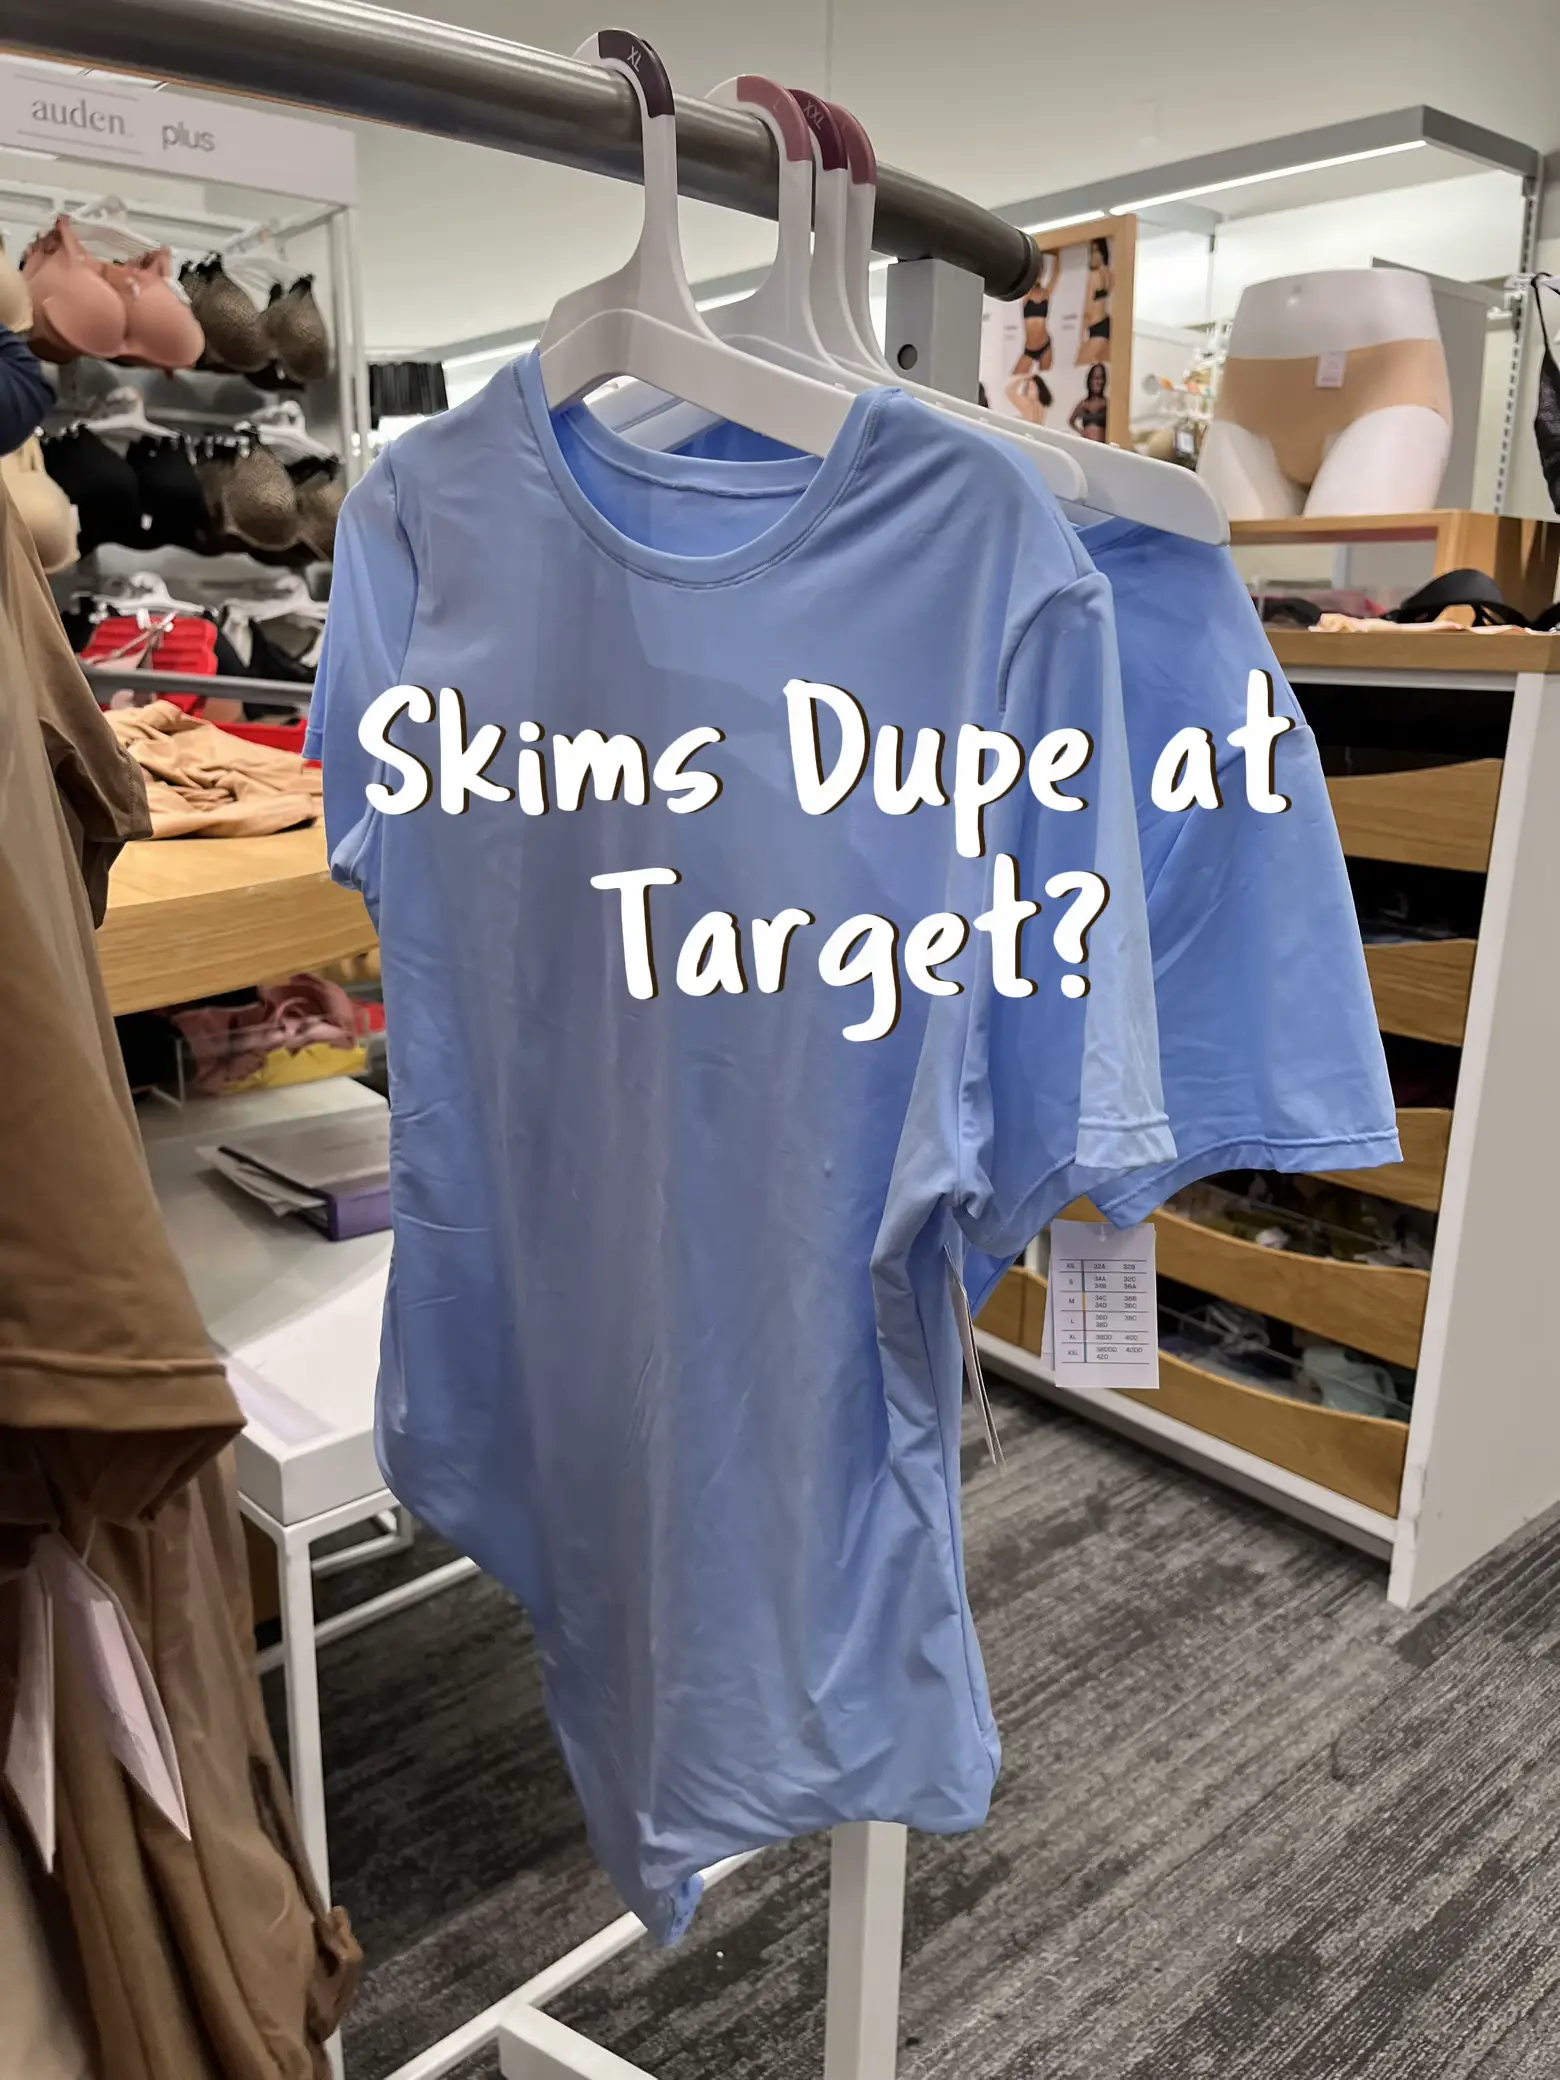 Skims Dupes at Target?? The best Skims Dupes yet?! 